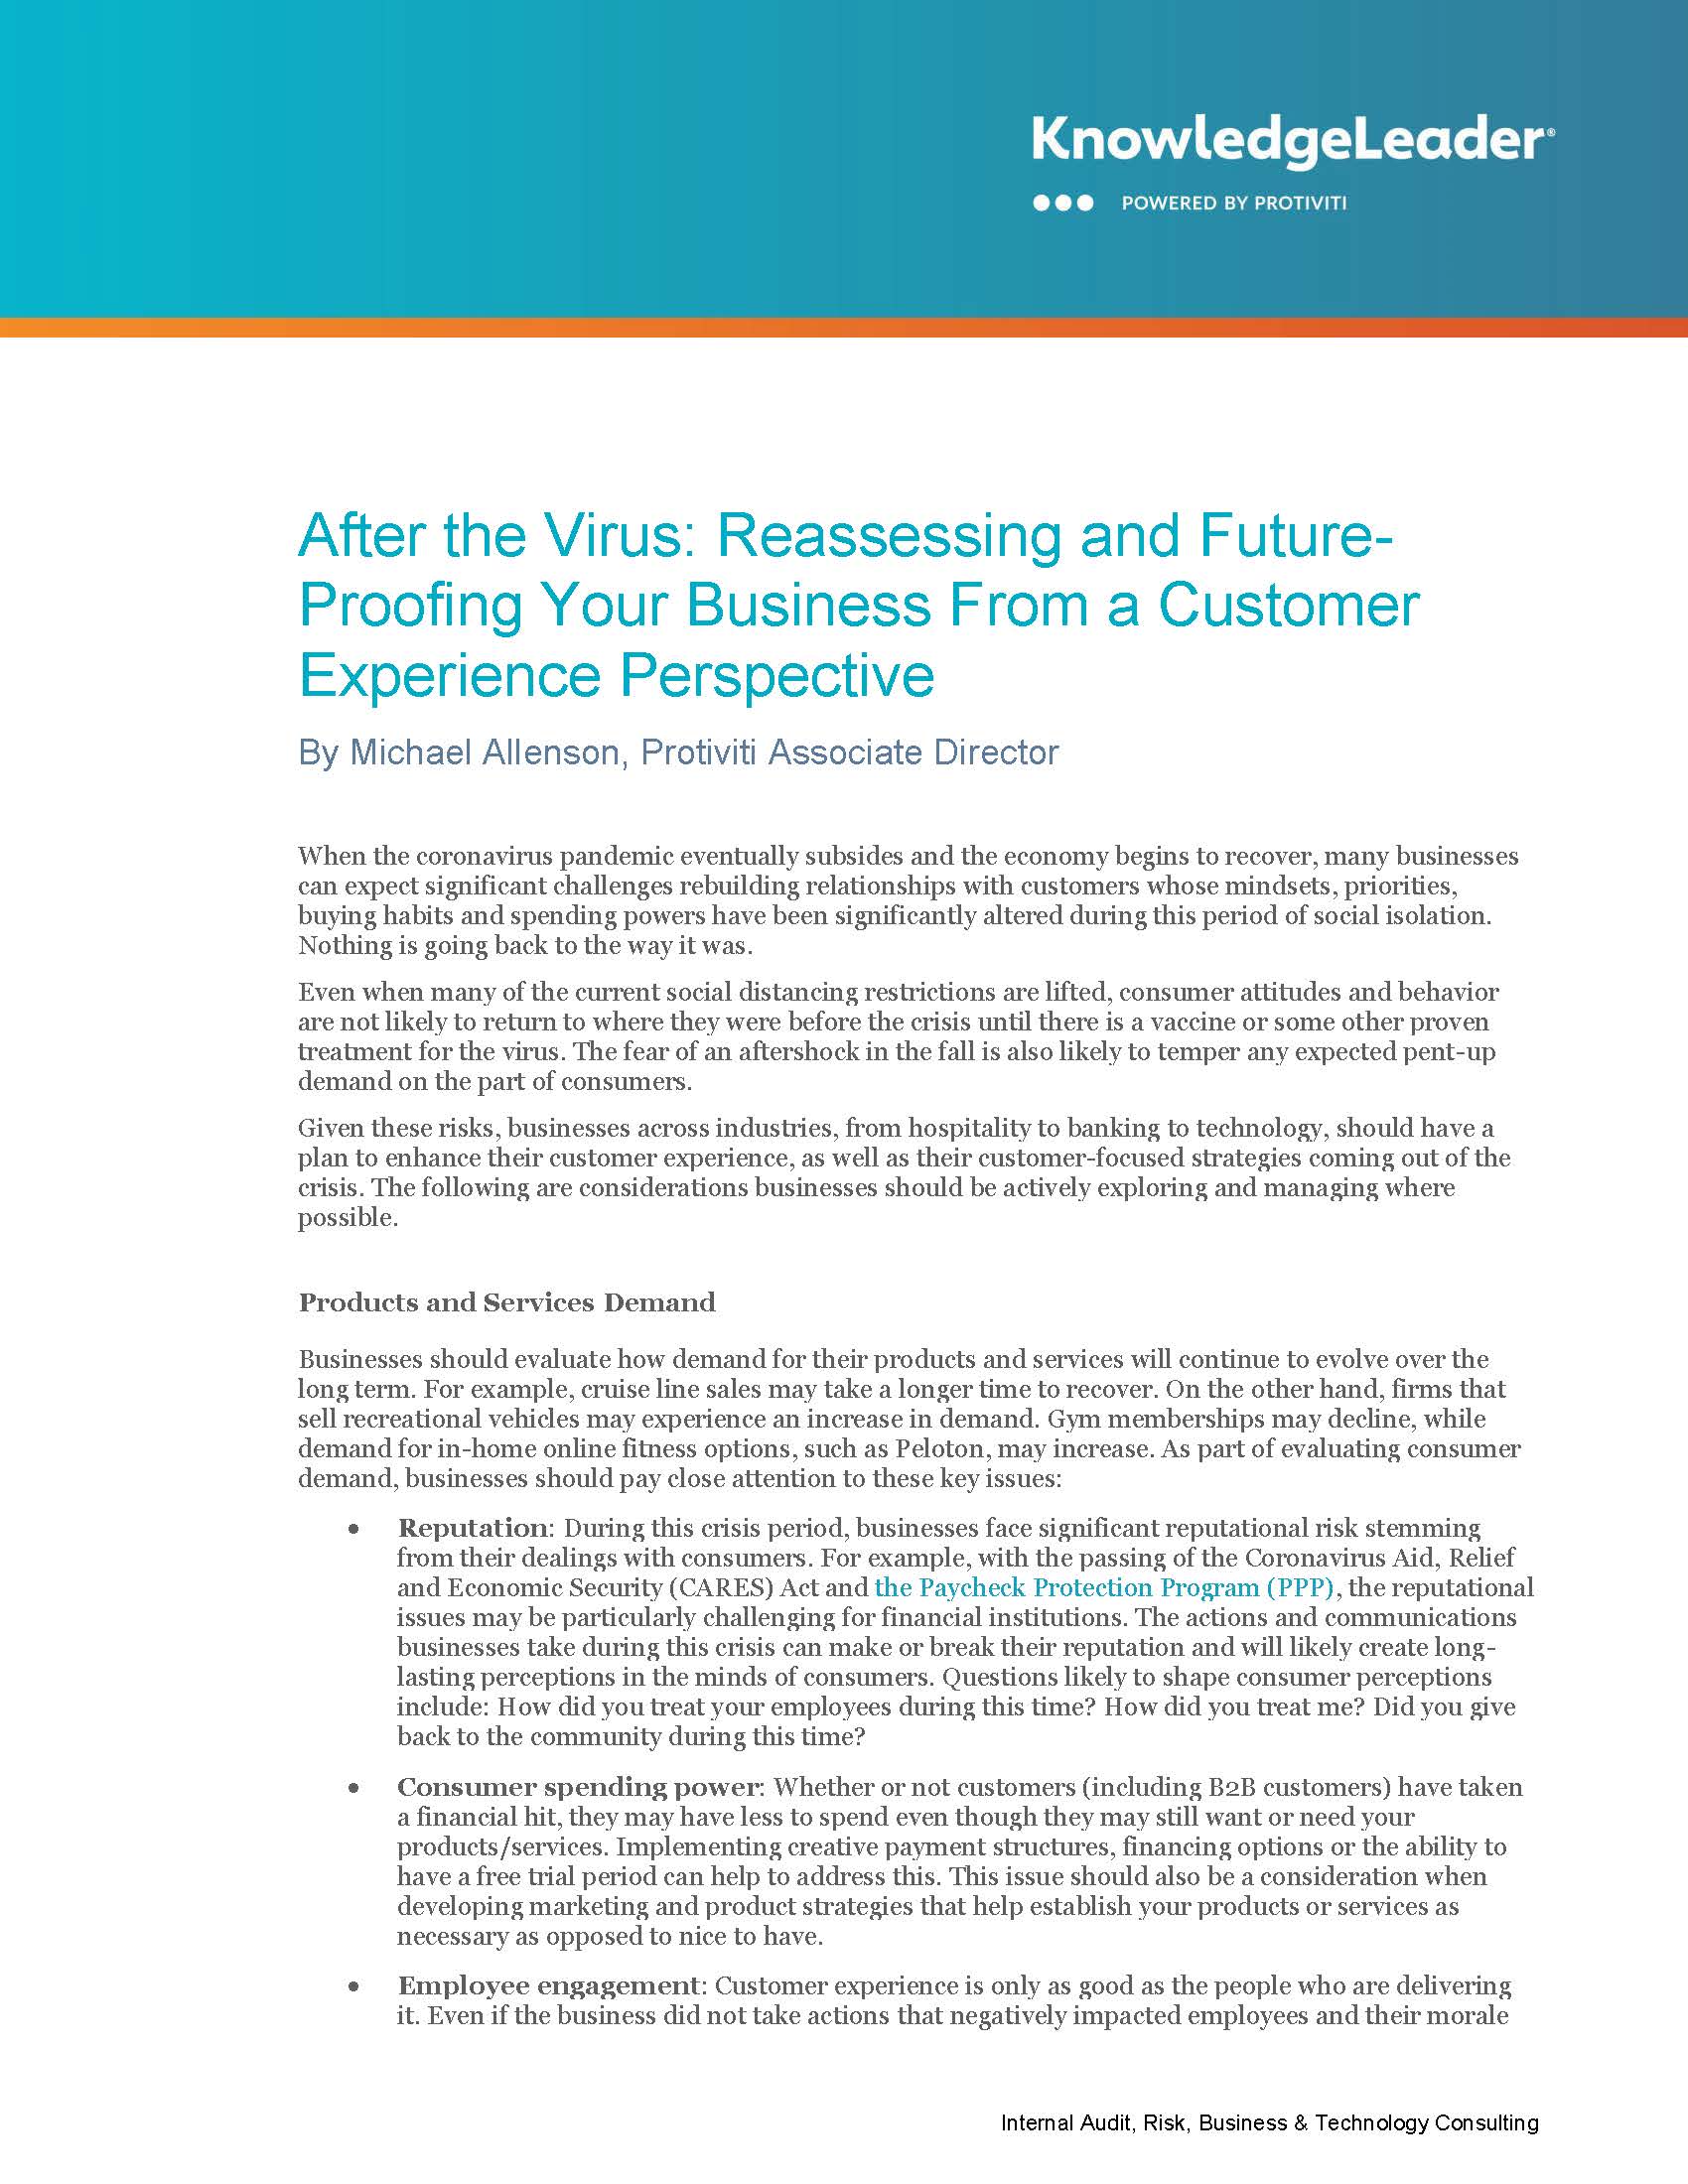 After the Virus: Reassessing and Future-Proofing Your Business From a Customer Experience Perspective